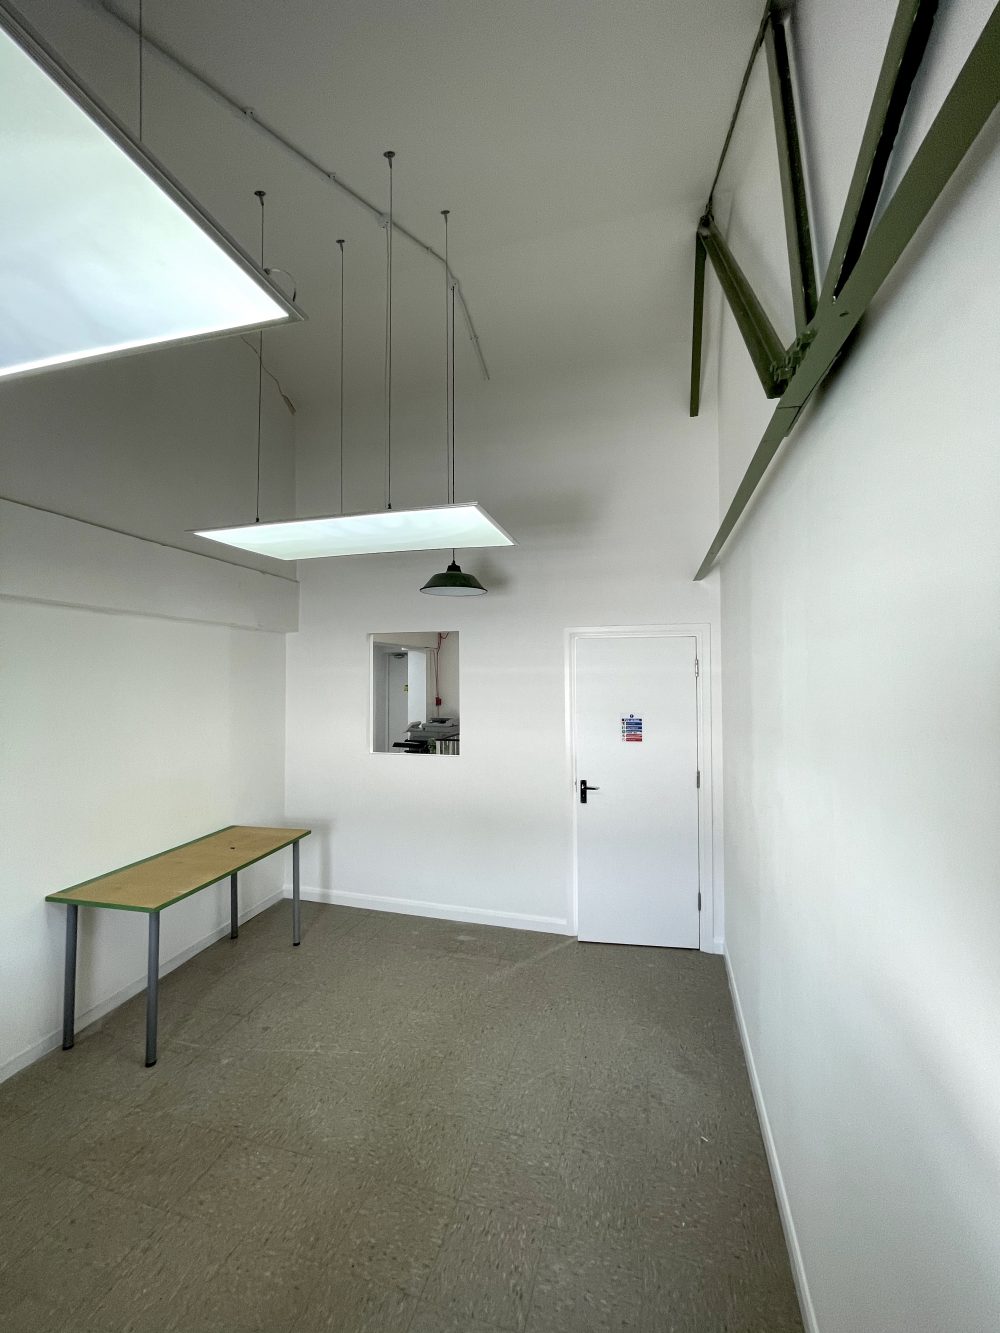 Studio Available to rent in N16 Green Lane Pic1